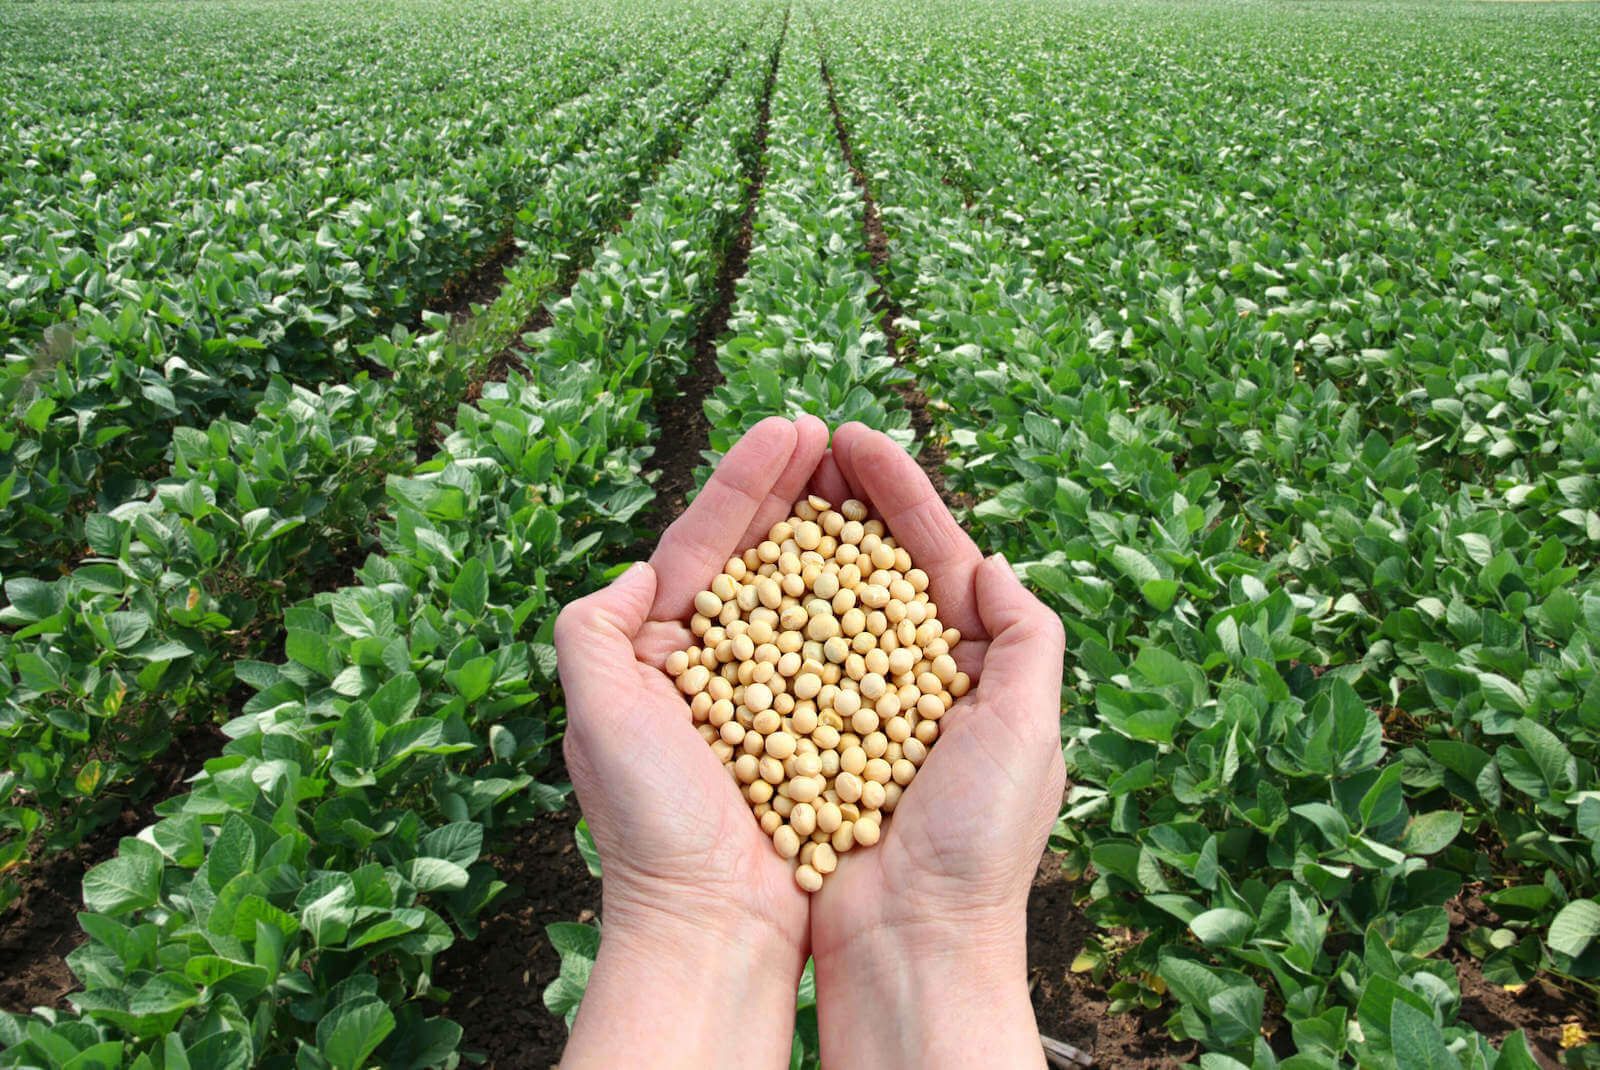 Image of hands holding seed in front of a nicely planted field with full rows of beans